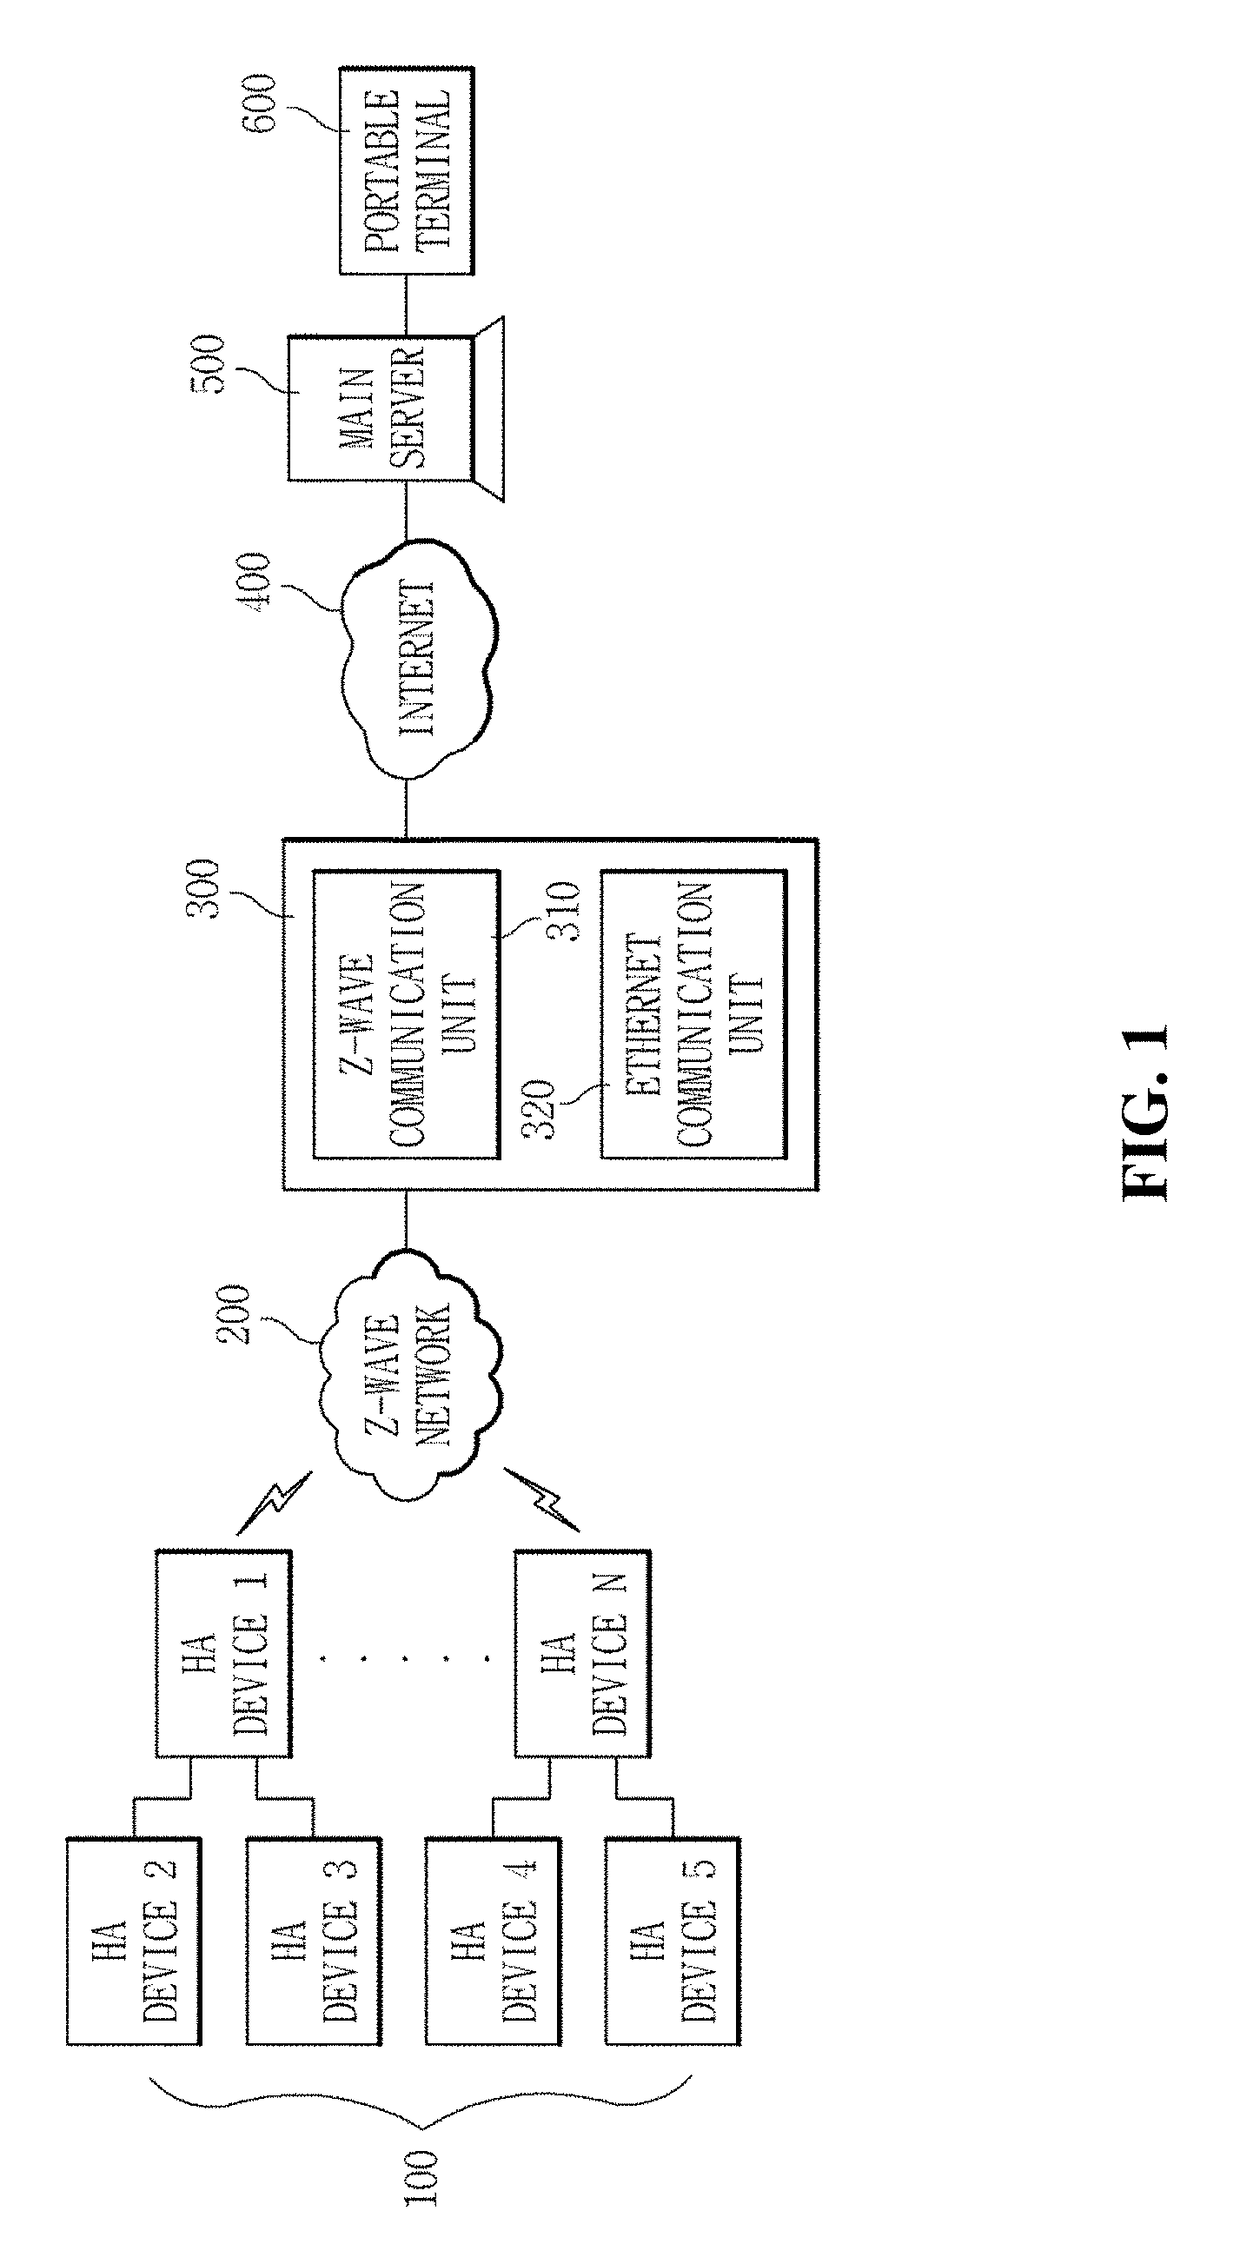 Home network system using z-wave network and home automation device connection method using same